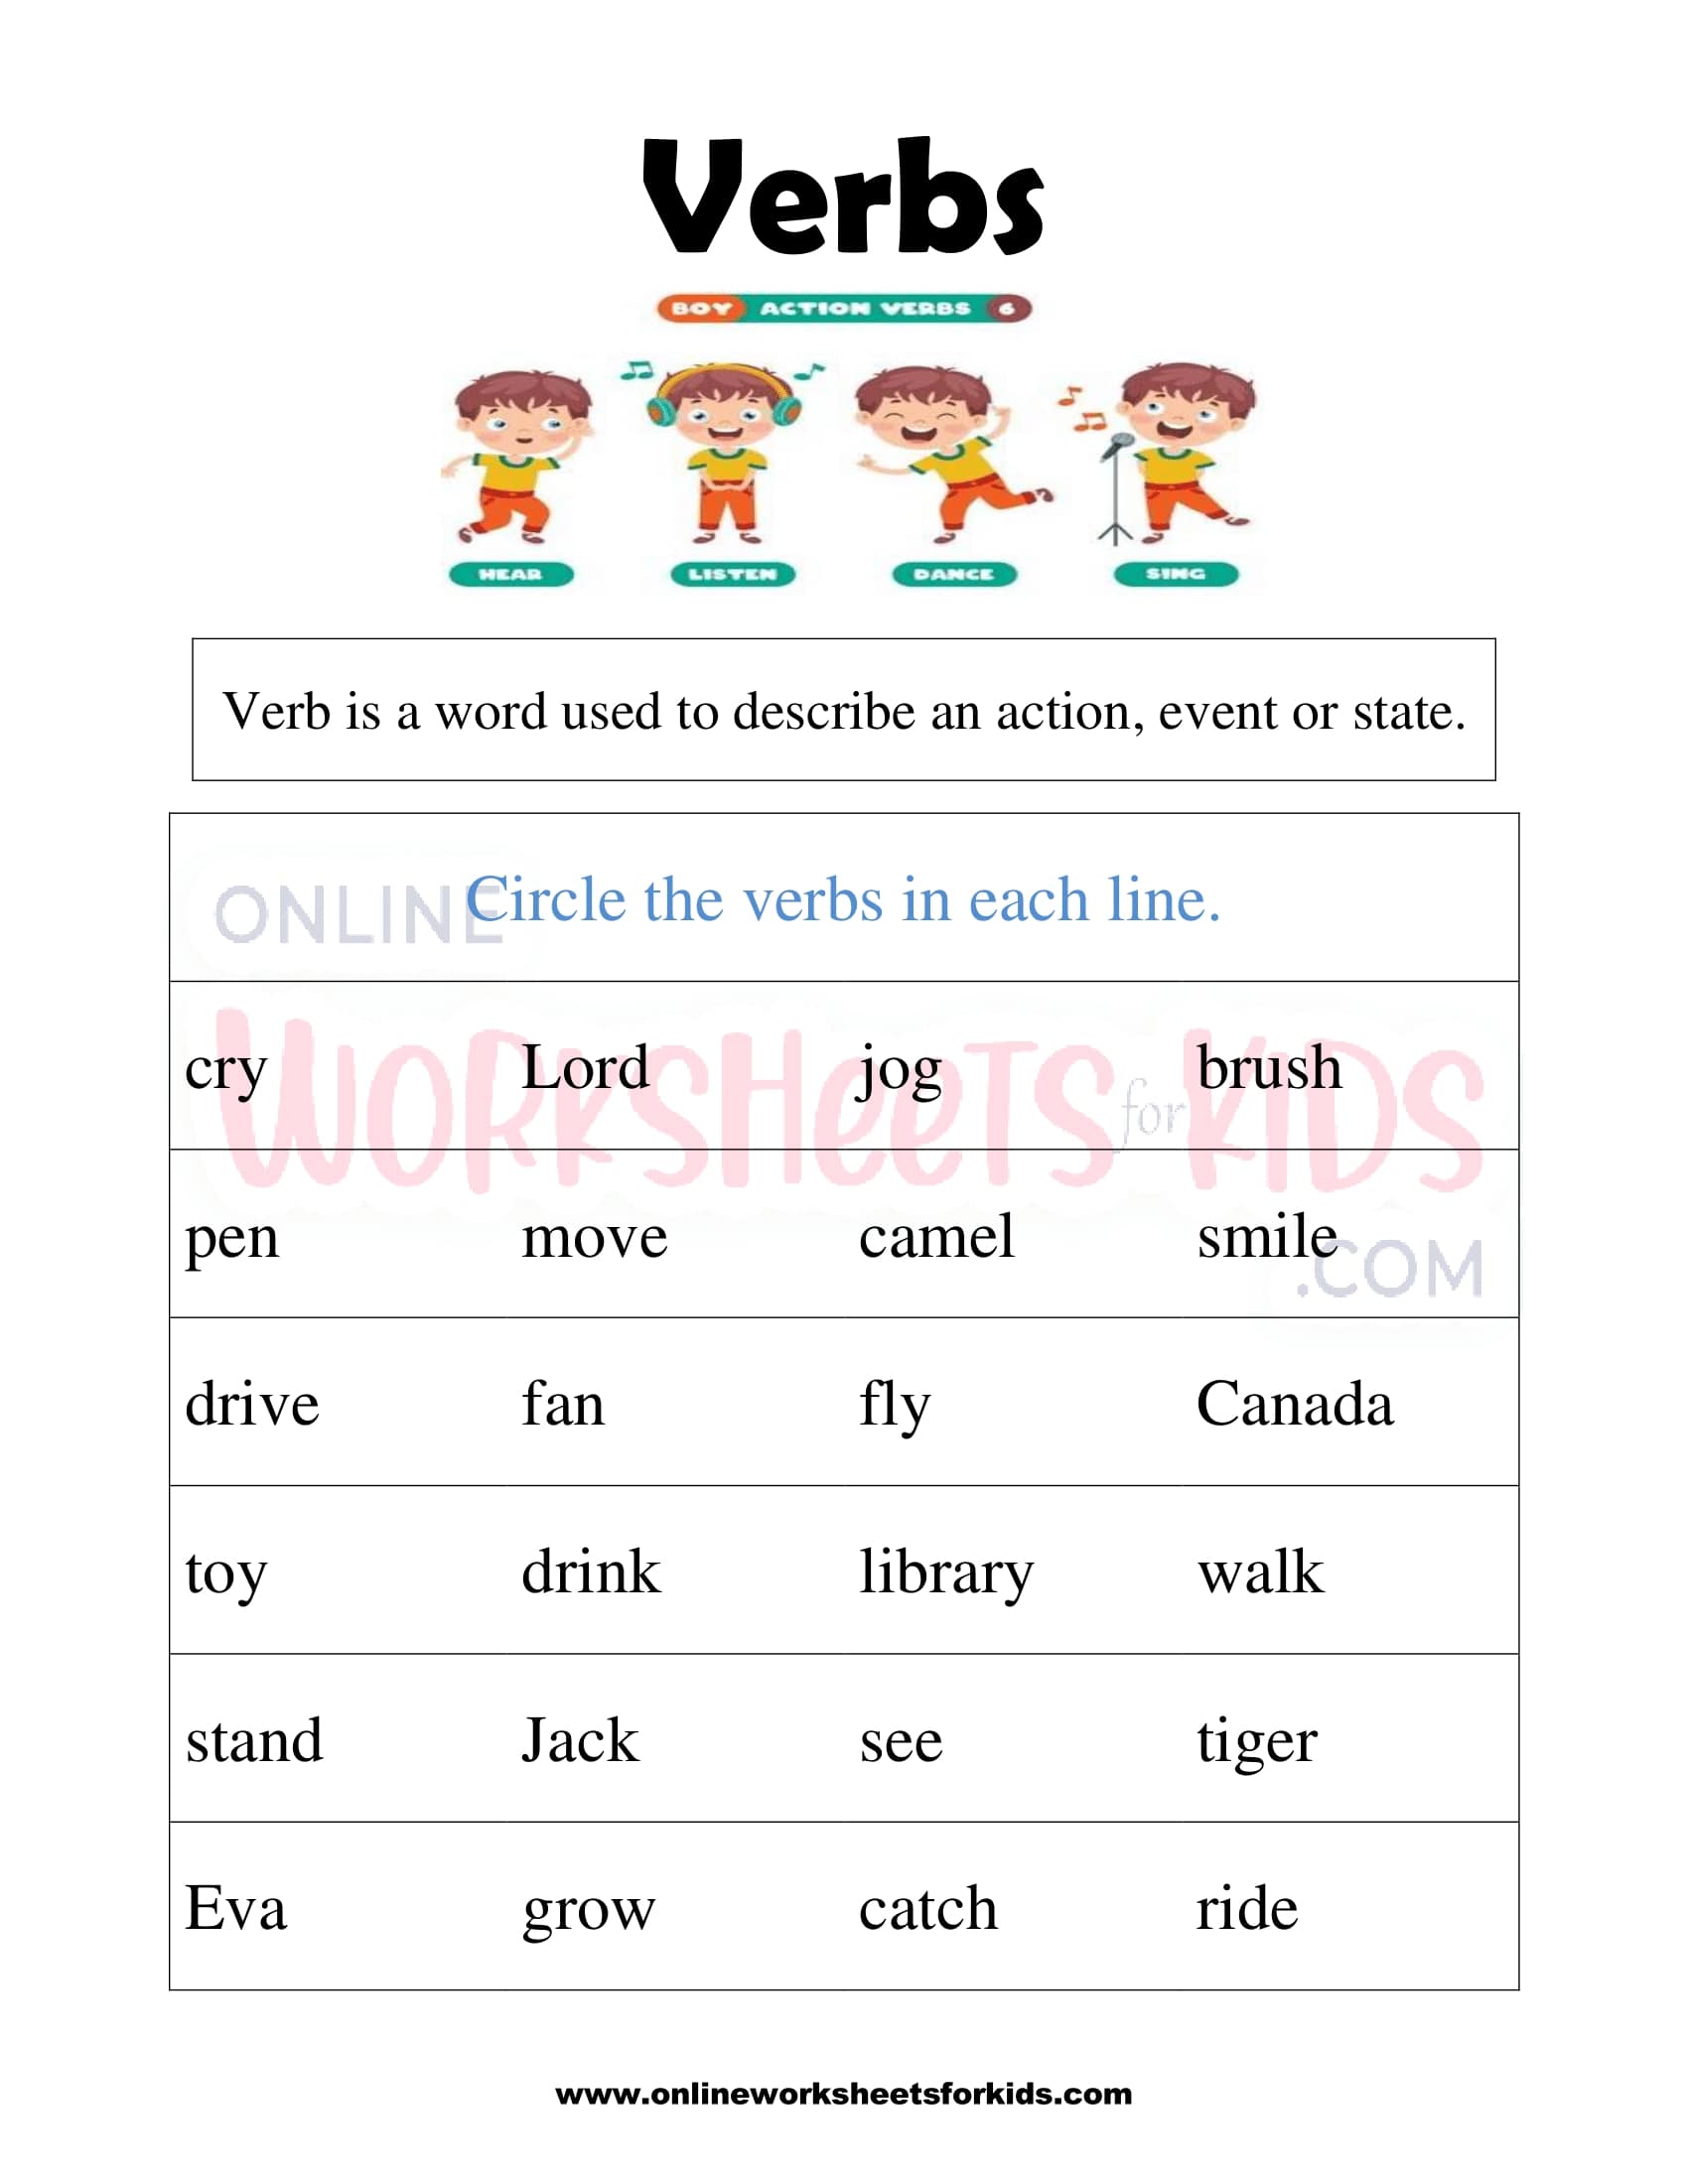 Worksheets On Nouns And Verbs For Grade 1